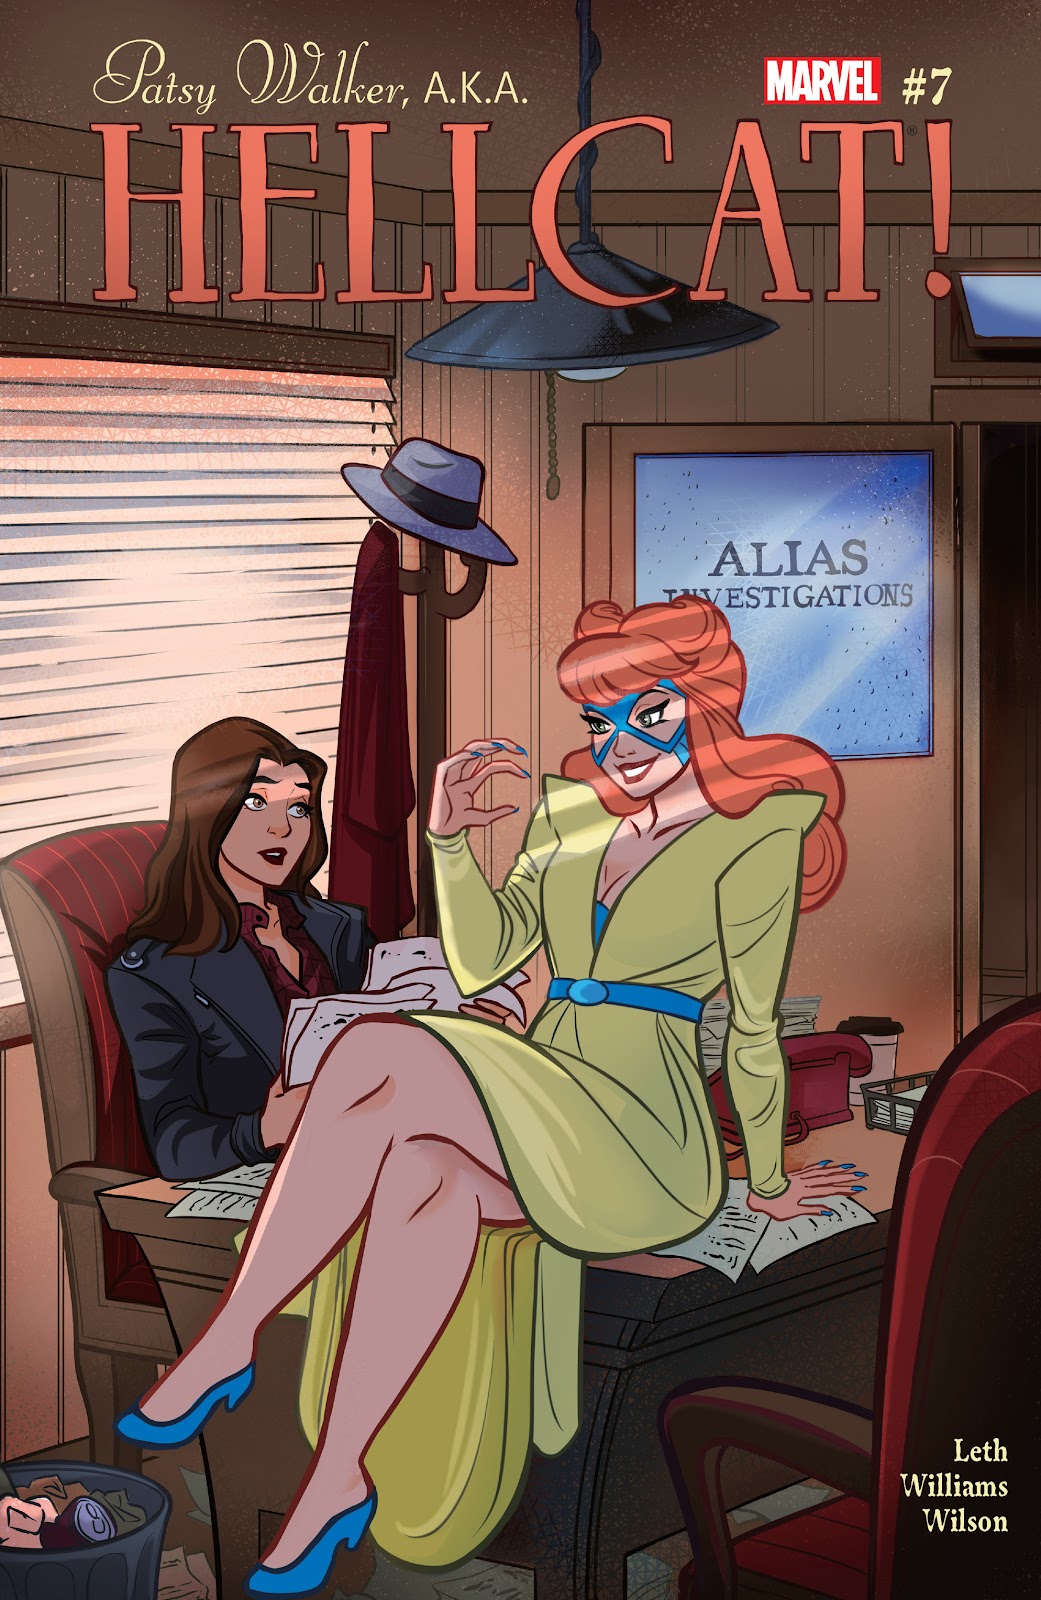 Patsy Walker, A.K.A. Hellcat! issue 7 - Page 1